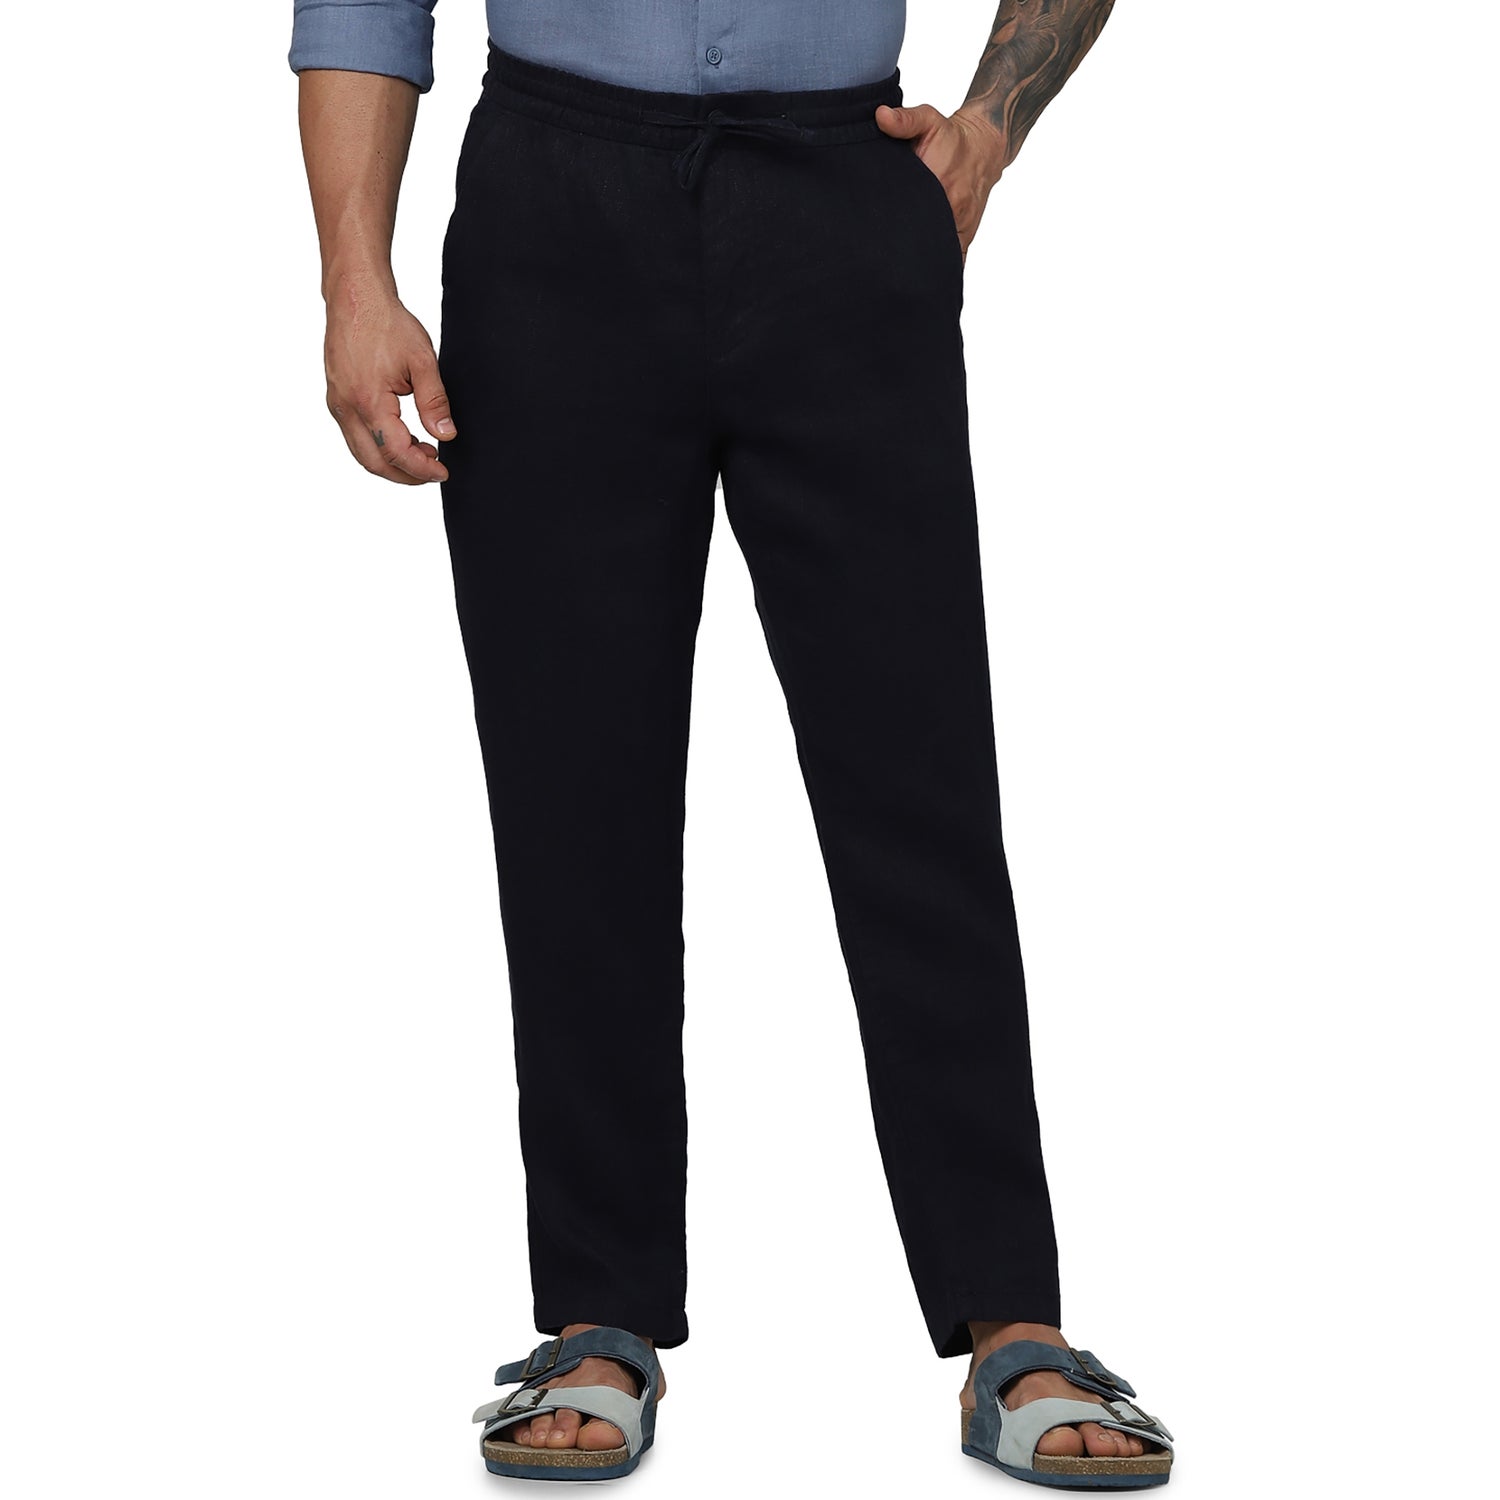 Men's Navy Blue Solid Regular Fit Linen Casual Trousers (DOLINUS1)